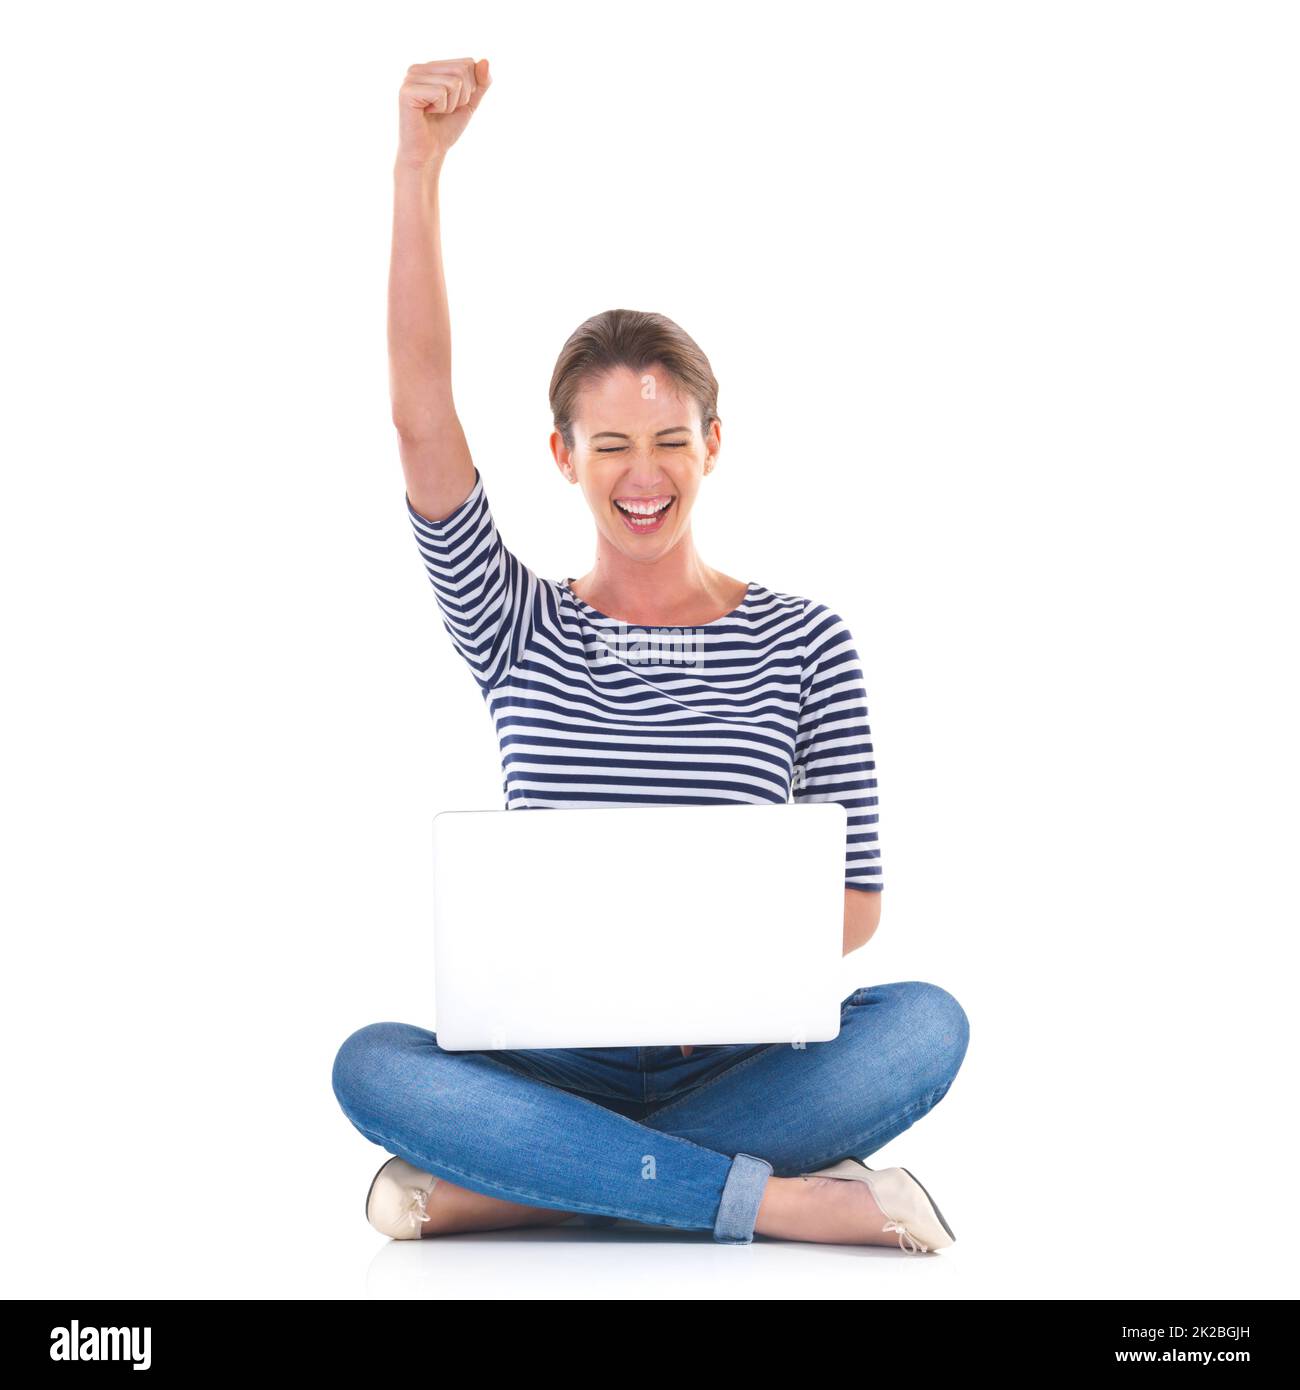 One million likes. Studio shot of a young woman sitting cross legged on the floor cheering while using a laptop. Stock Photo